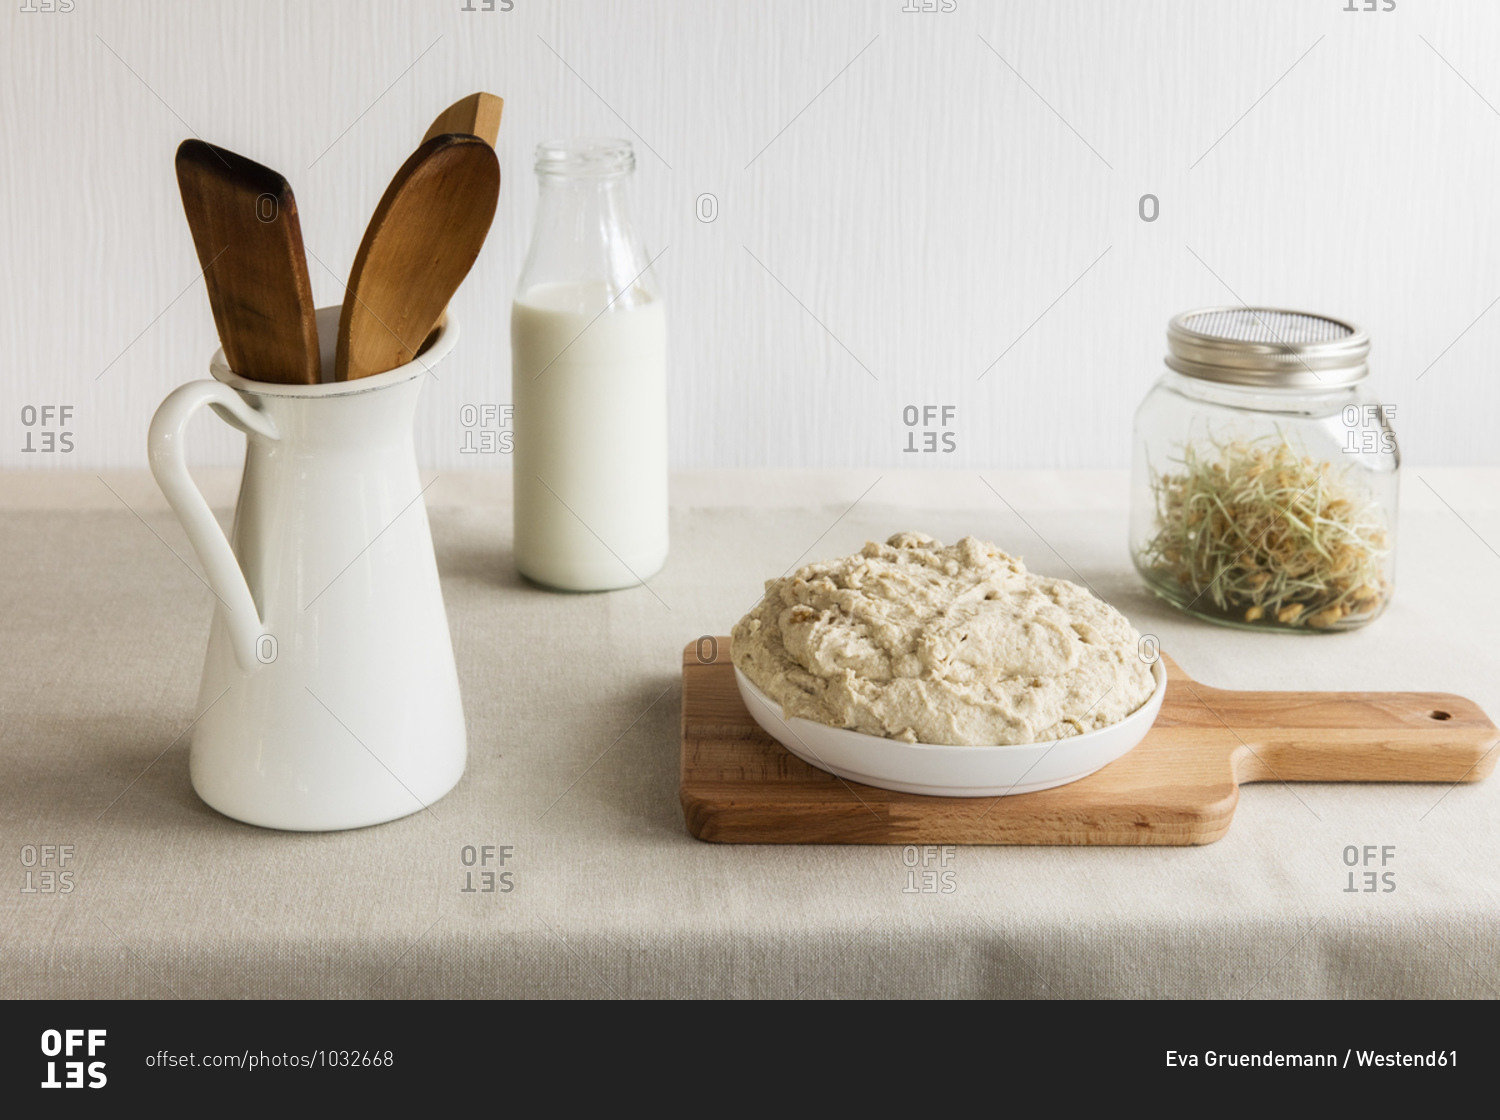 Jug with wooden spoon and spatula- milk bottle- jar of sprouts and dough on cutting board